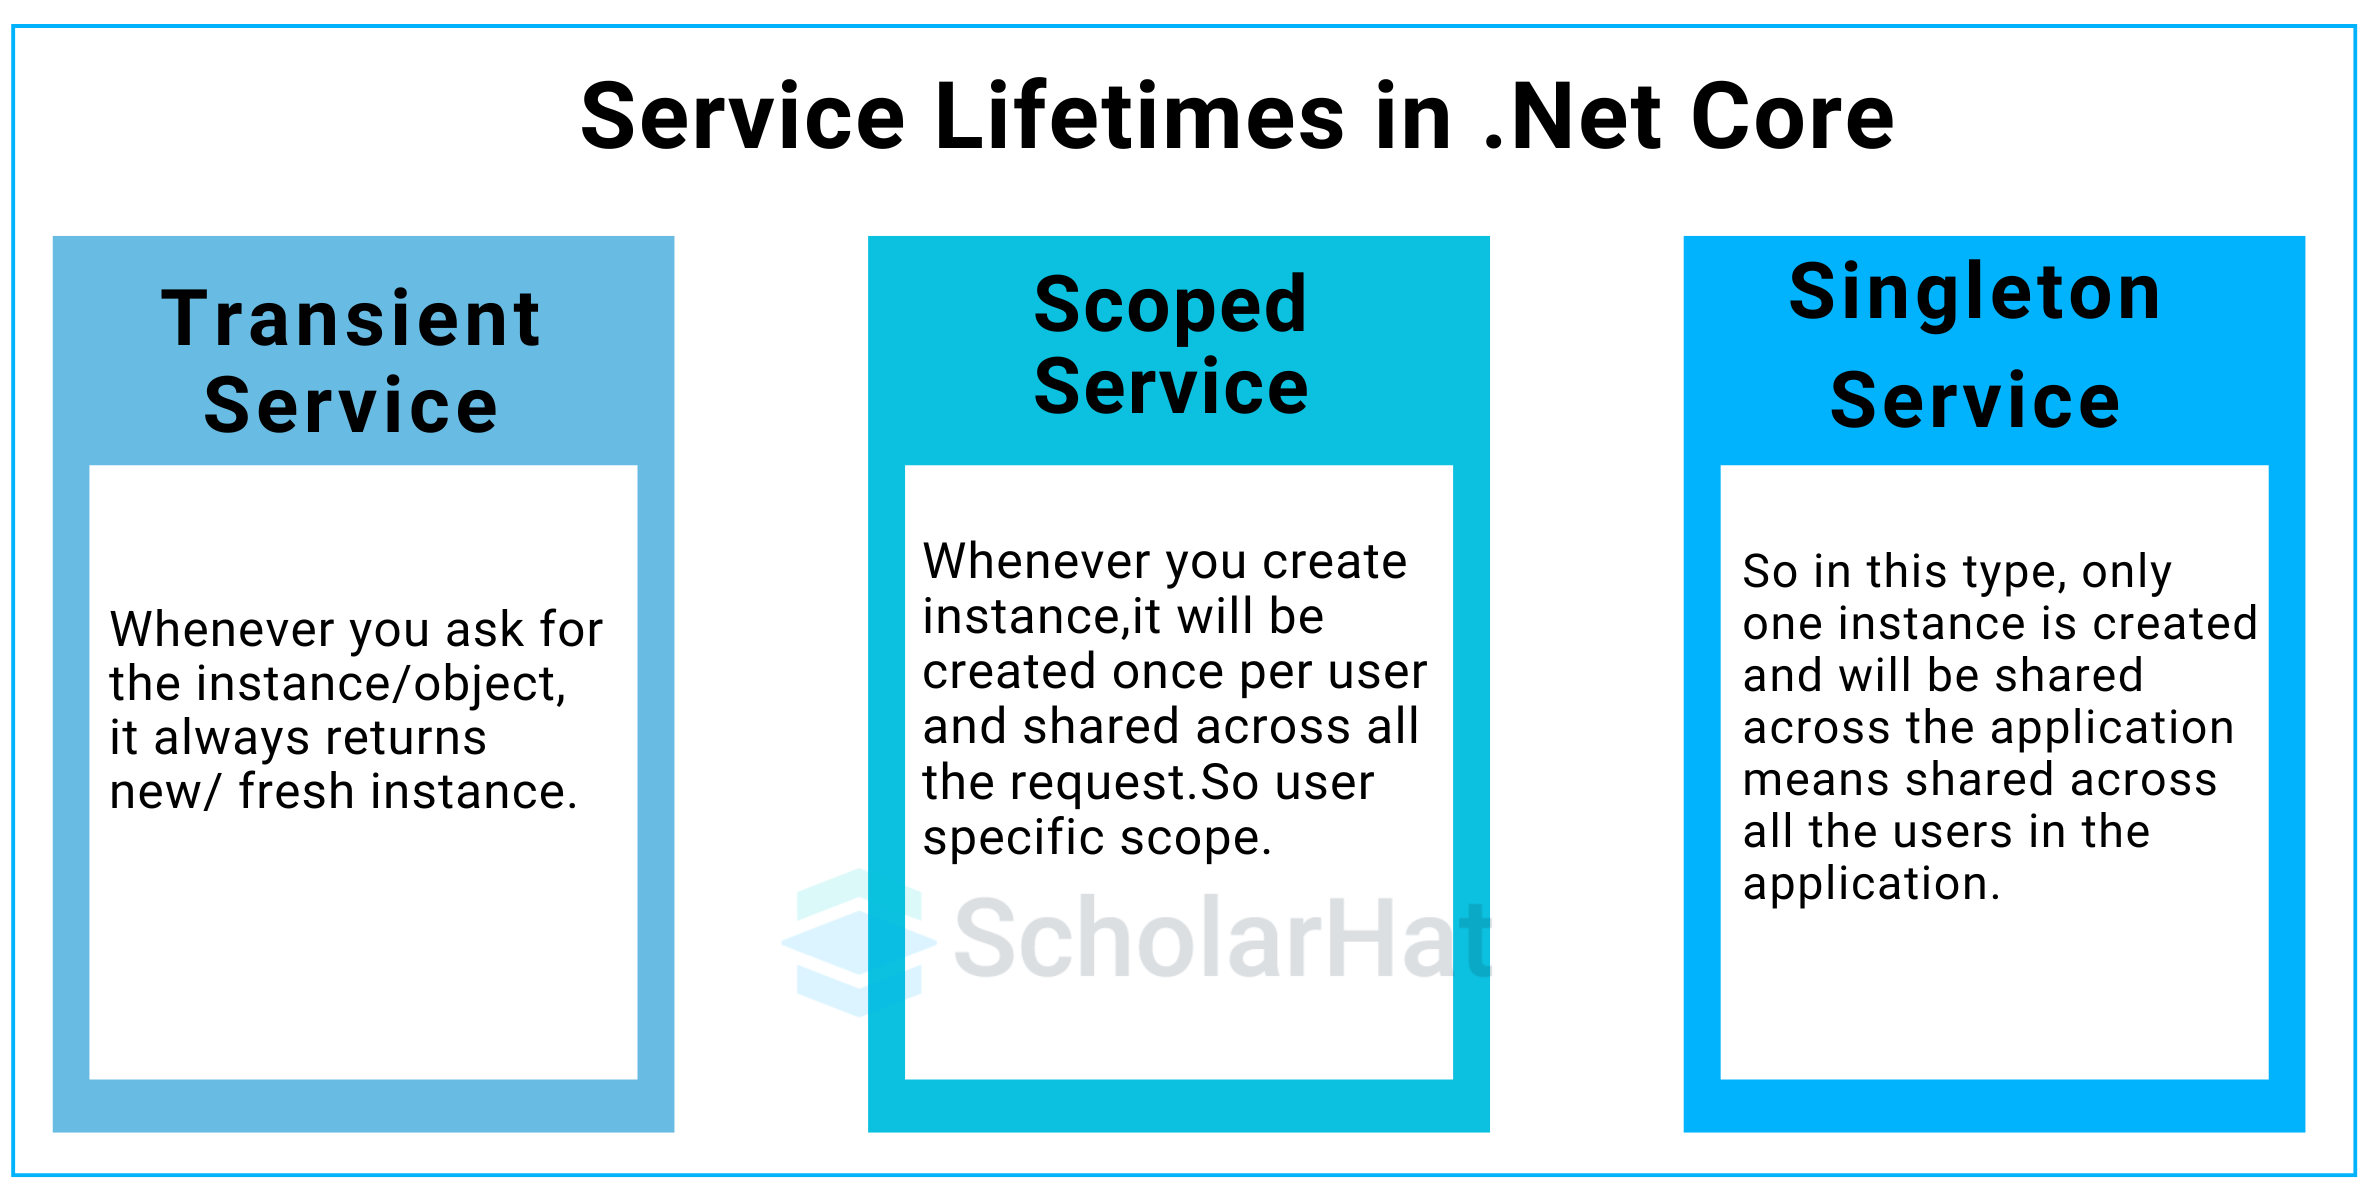 What are service lifetimes?